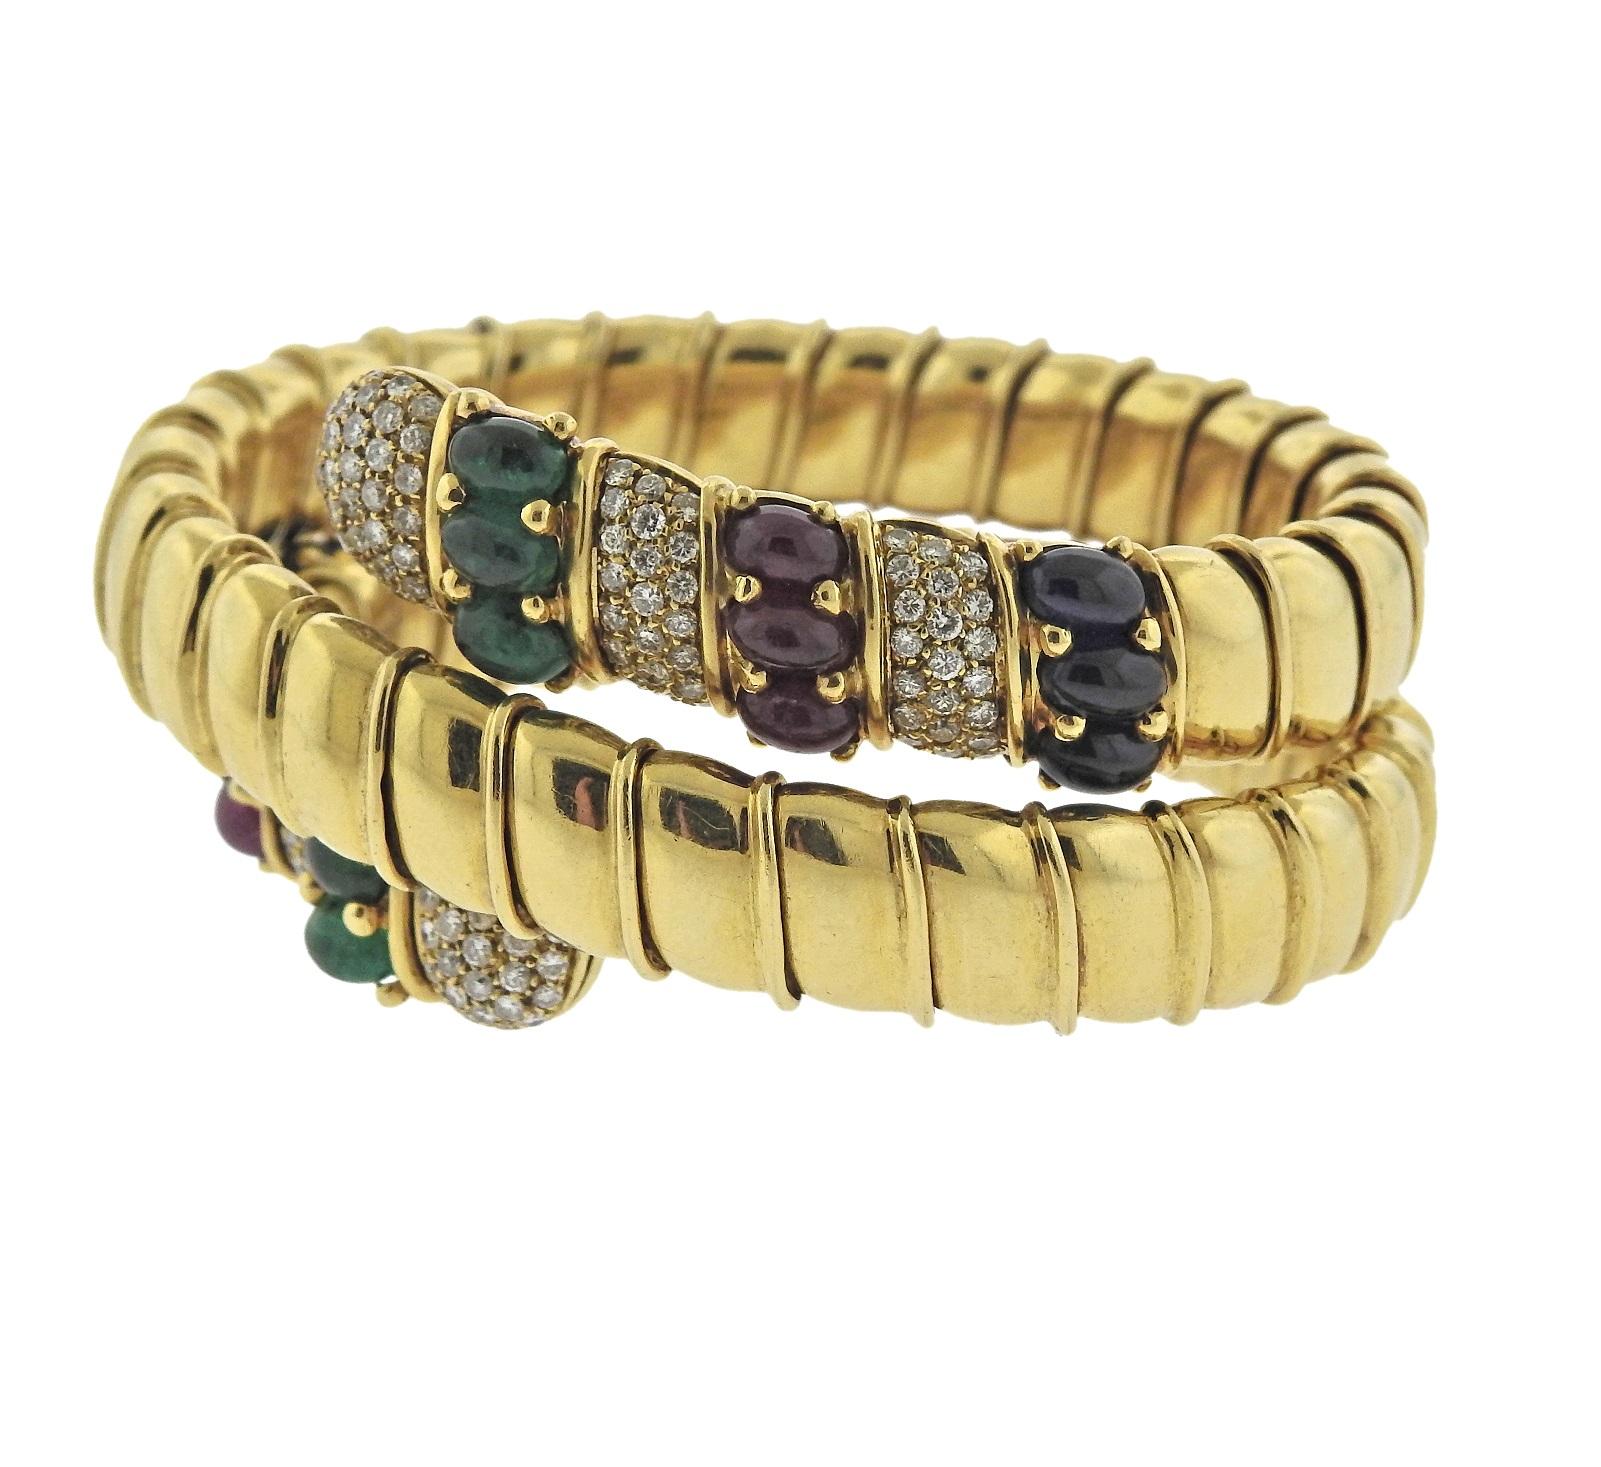 Beautiful 18k gold Italian crafted wrap bracelet, featuring sapphire, emerald and ruby cabochons, surrounded with approximately 2.40ctw in VS/GH diamonds. Bracelet will fit approx. 7